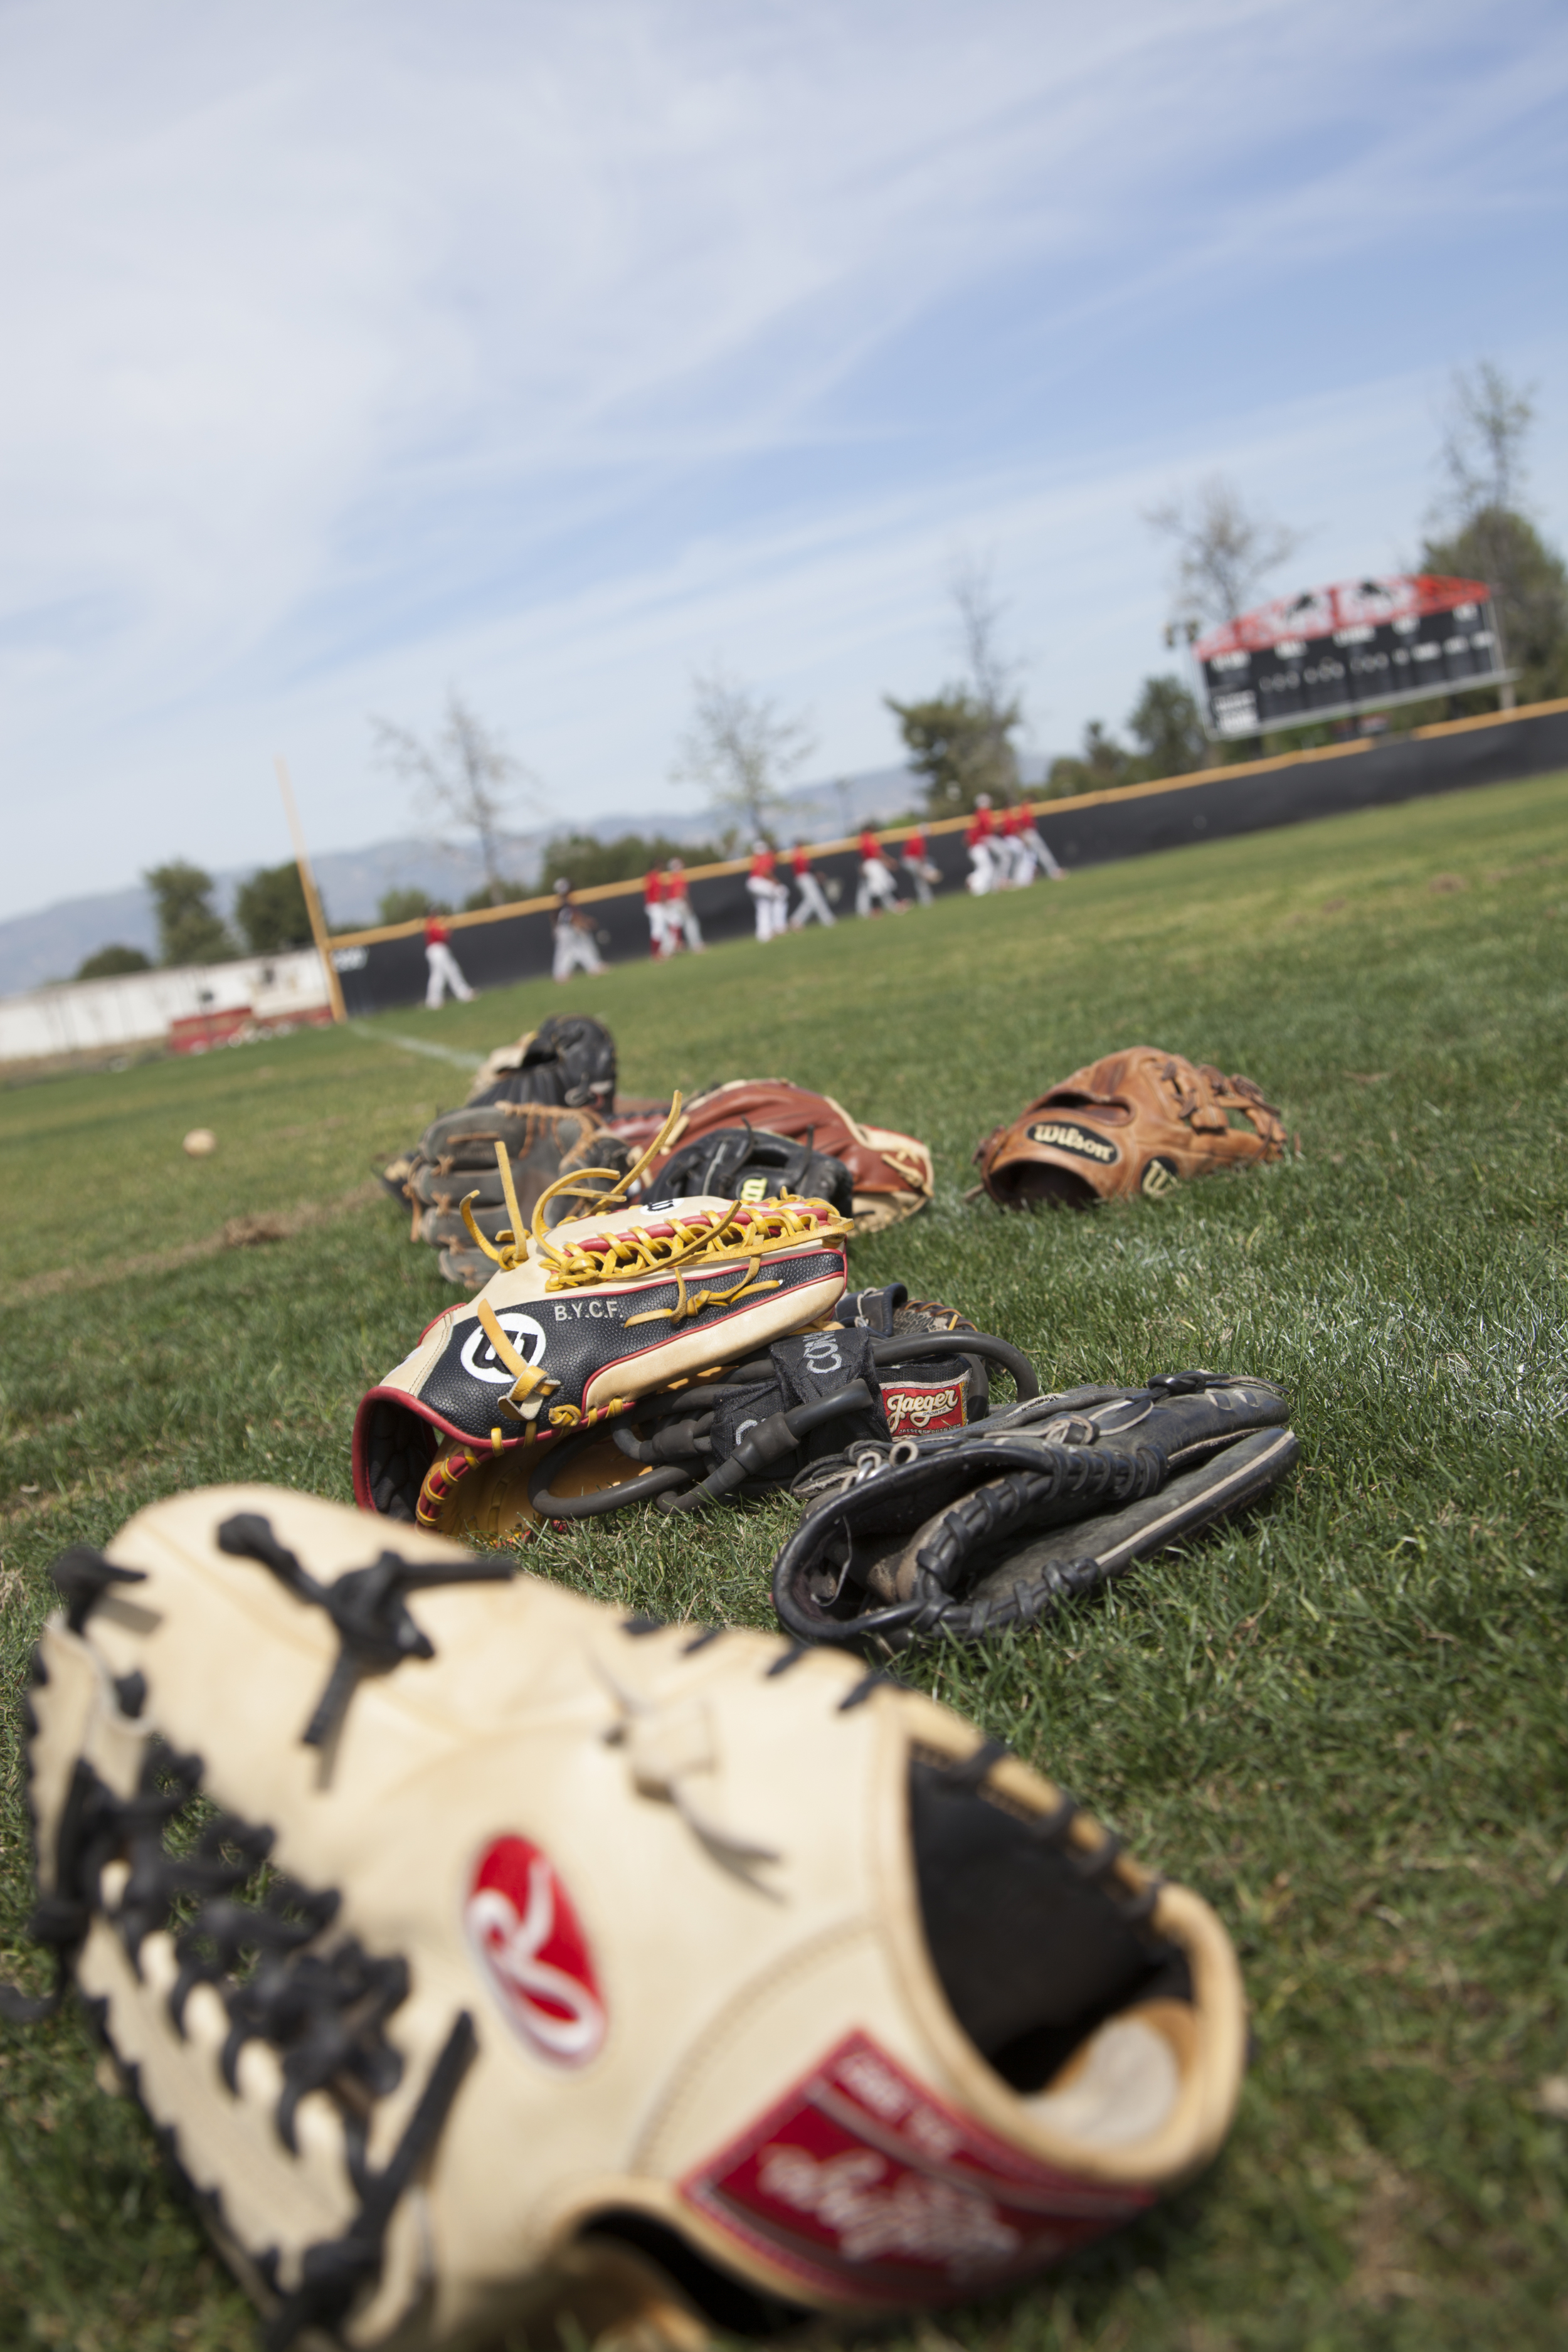  Gloves lay on the grass&nbsp;as the team practices in the background at Joe Kelly Field on Tuesday, March 10, 2015. Woodland Hills, Calif.&nbsp;  Read the full story&nbsp; here  